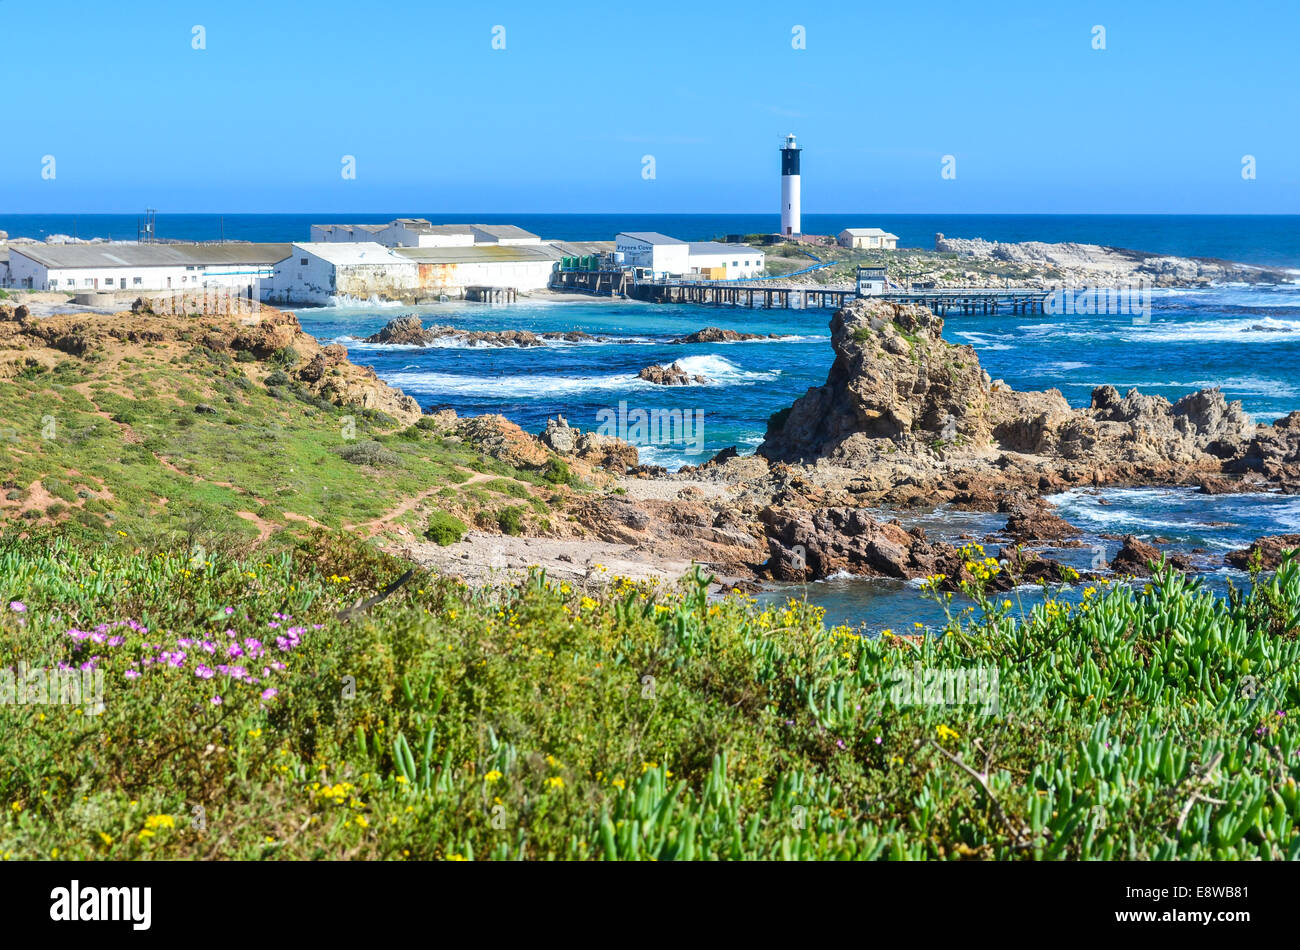 Lighthouse of Doring bay (Doringbaai) on the west coast of South Africa during the flower season Stock Photo